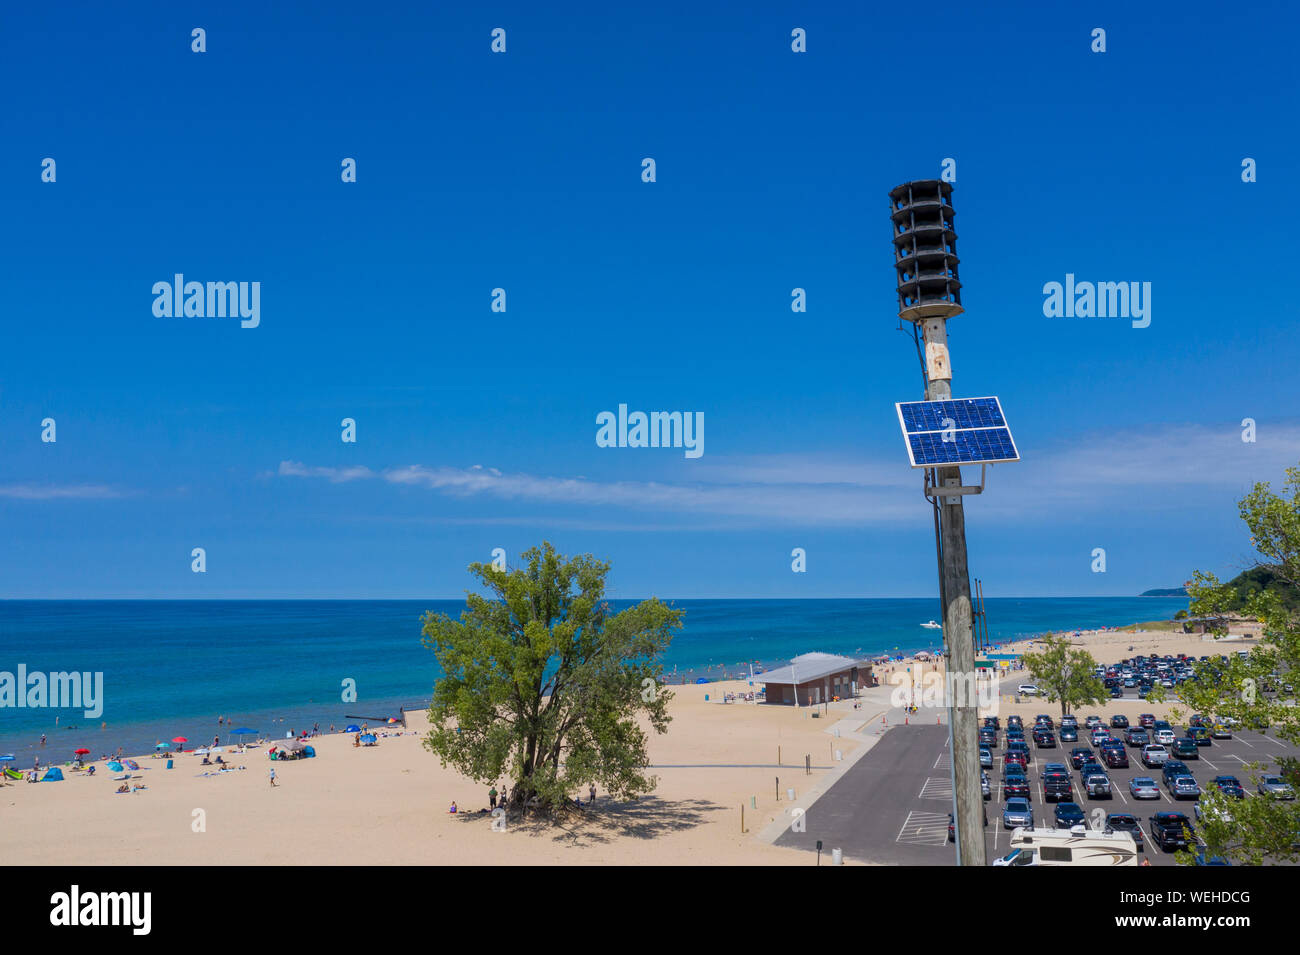 Sawyer, Michigan - An emergency warning siren at Warren Dunes State Park on Lake Michigan. The siren warns of nuclear accidents at the nearby D.C. Coo Stock Photo